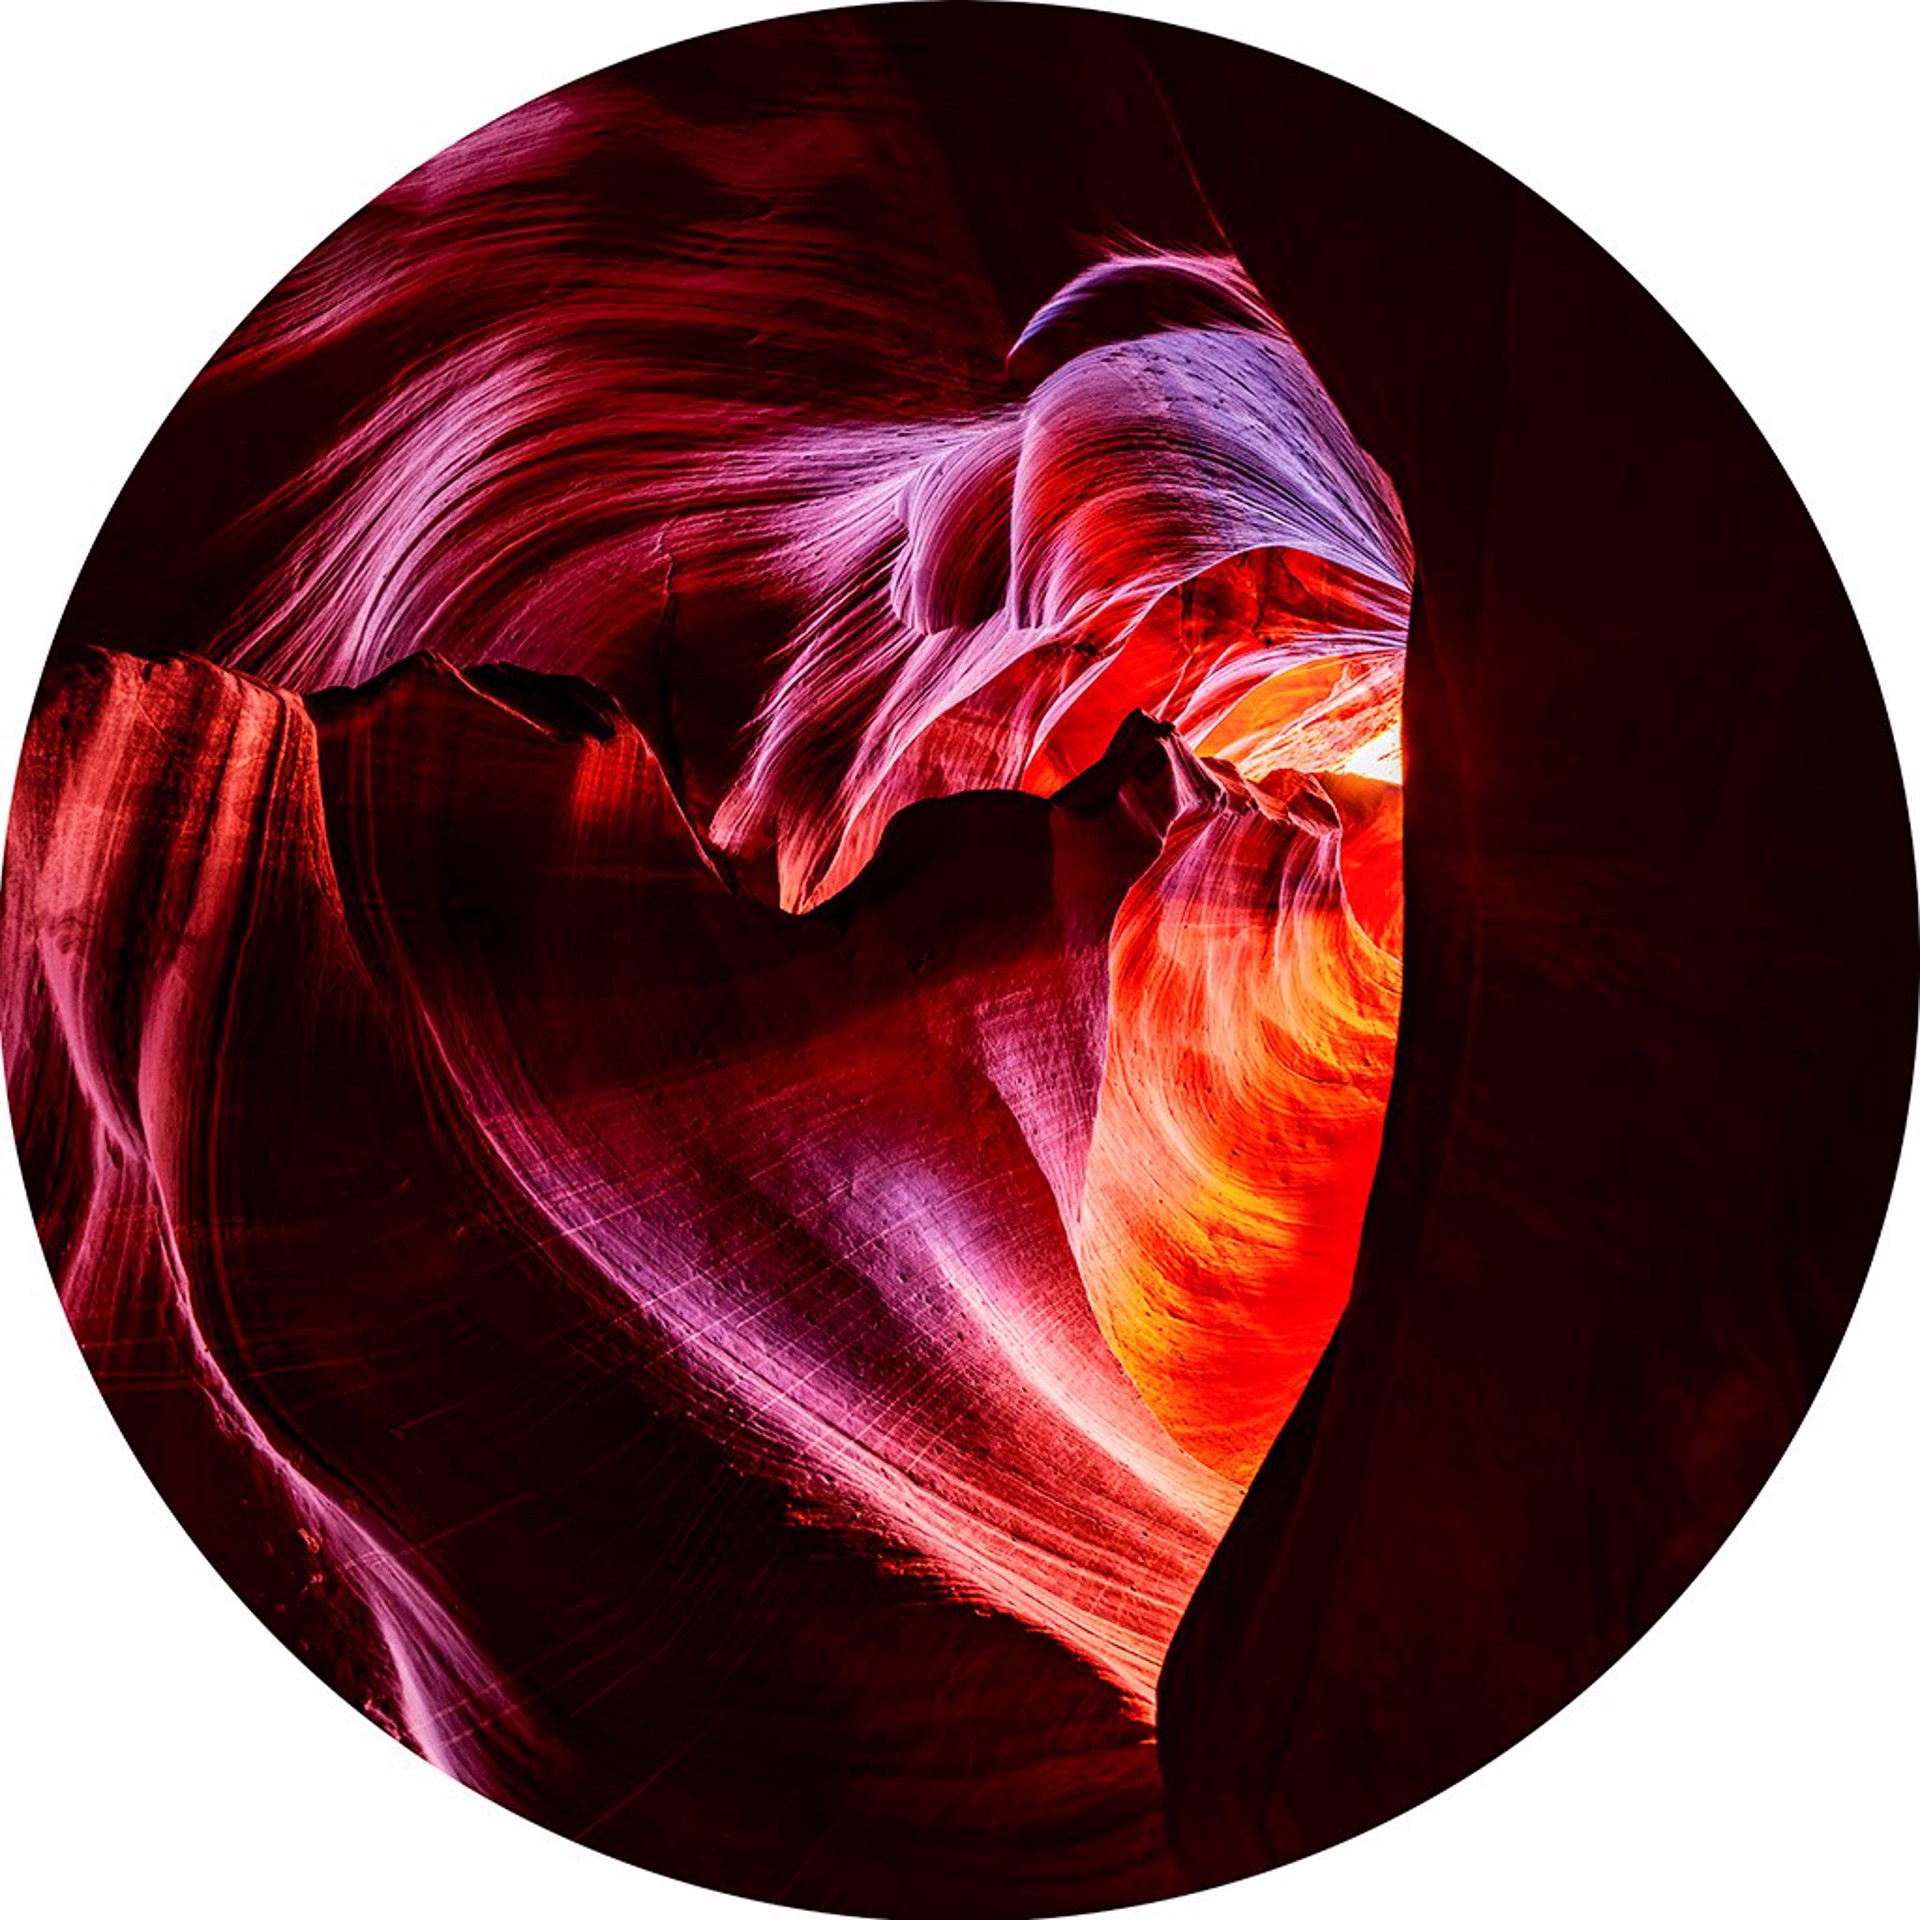 Heart of the Canyon (round) by Bryan Pezman